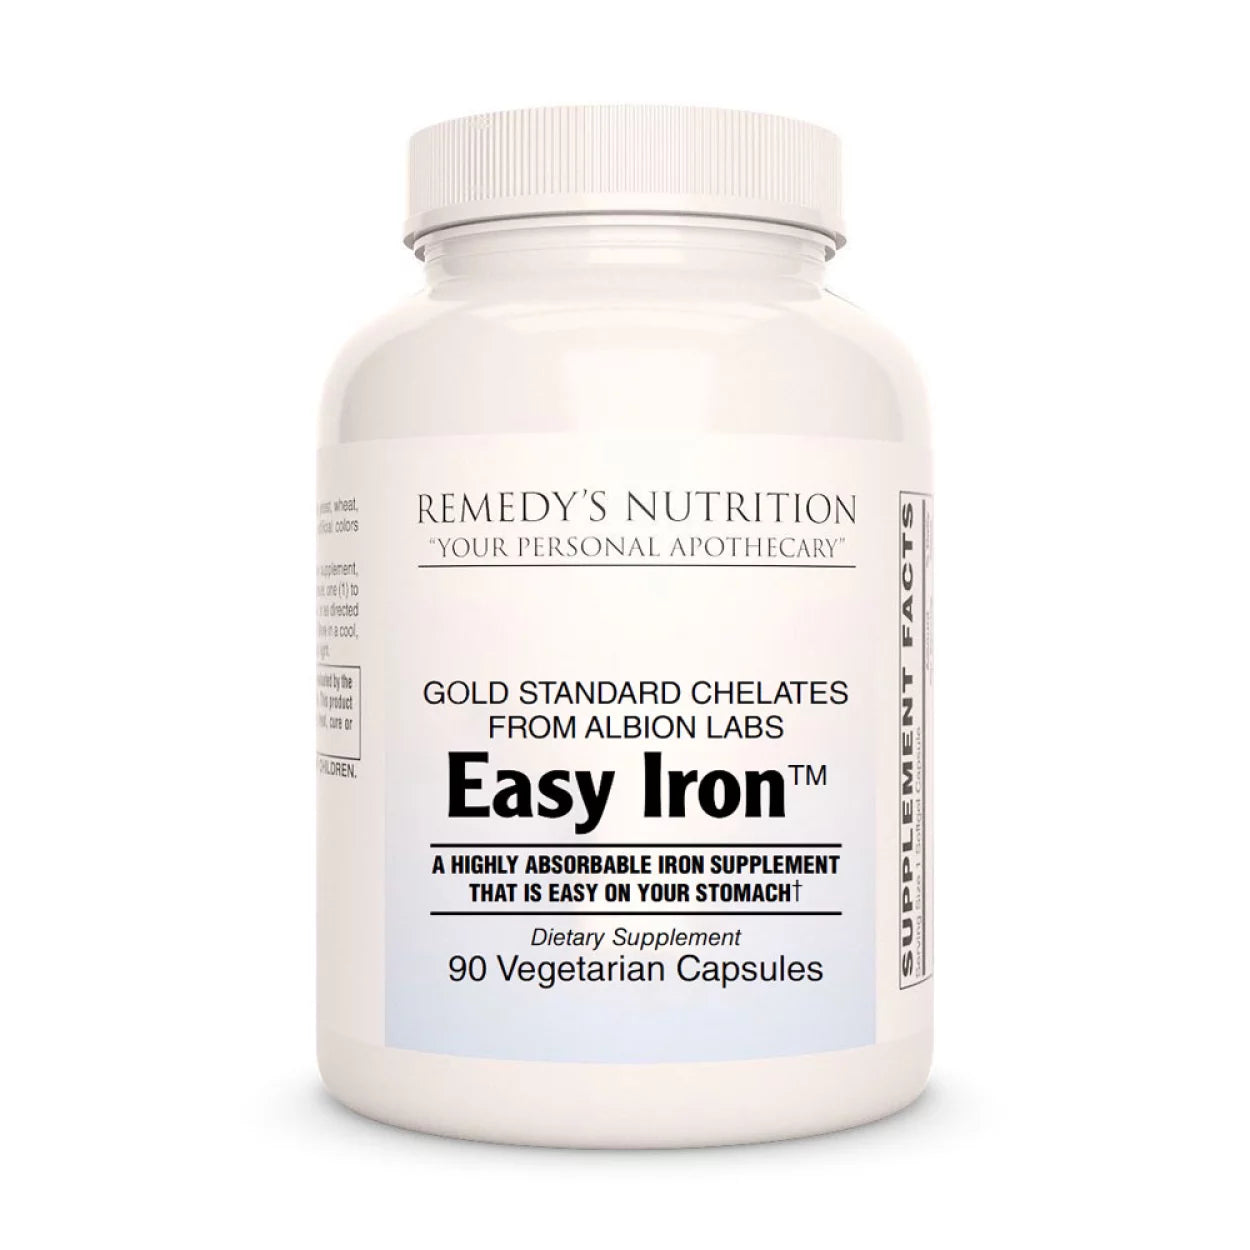 Image of Remedy's Nutrition® Easy Iron Capsules Dietary Supplement front bottle. Made in the USA. Gentle Iron.